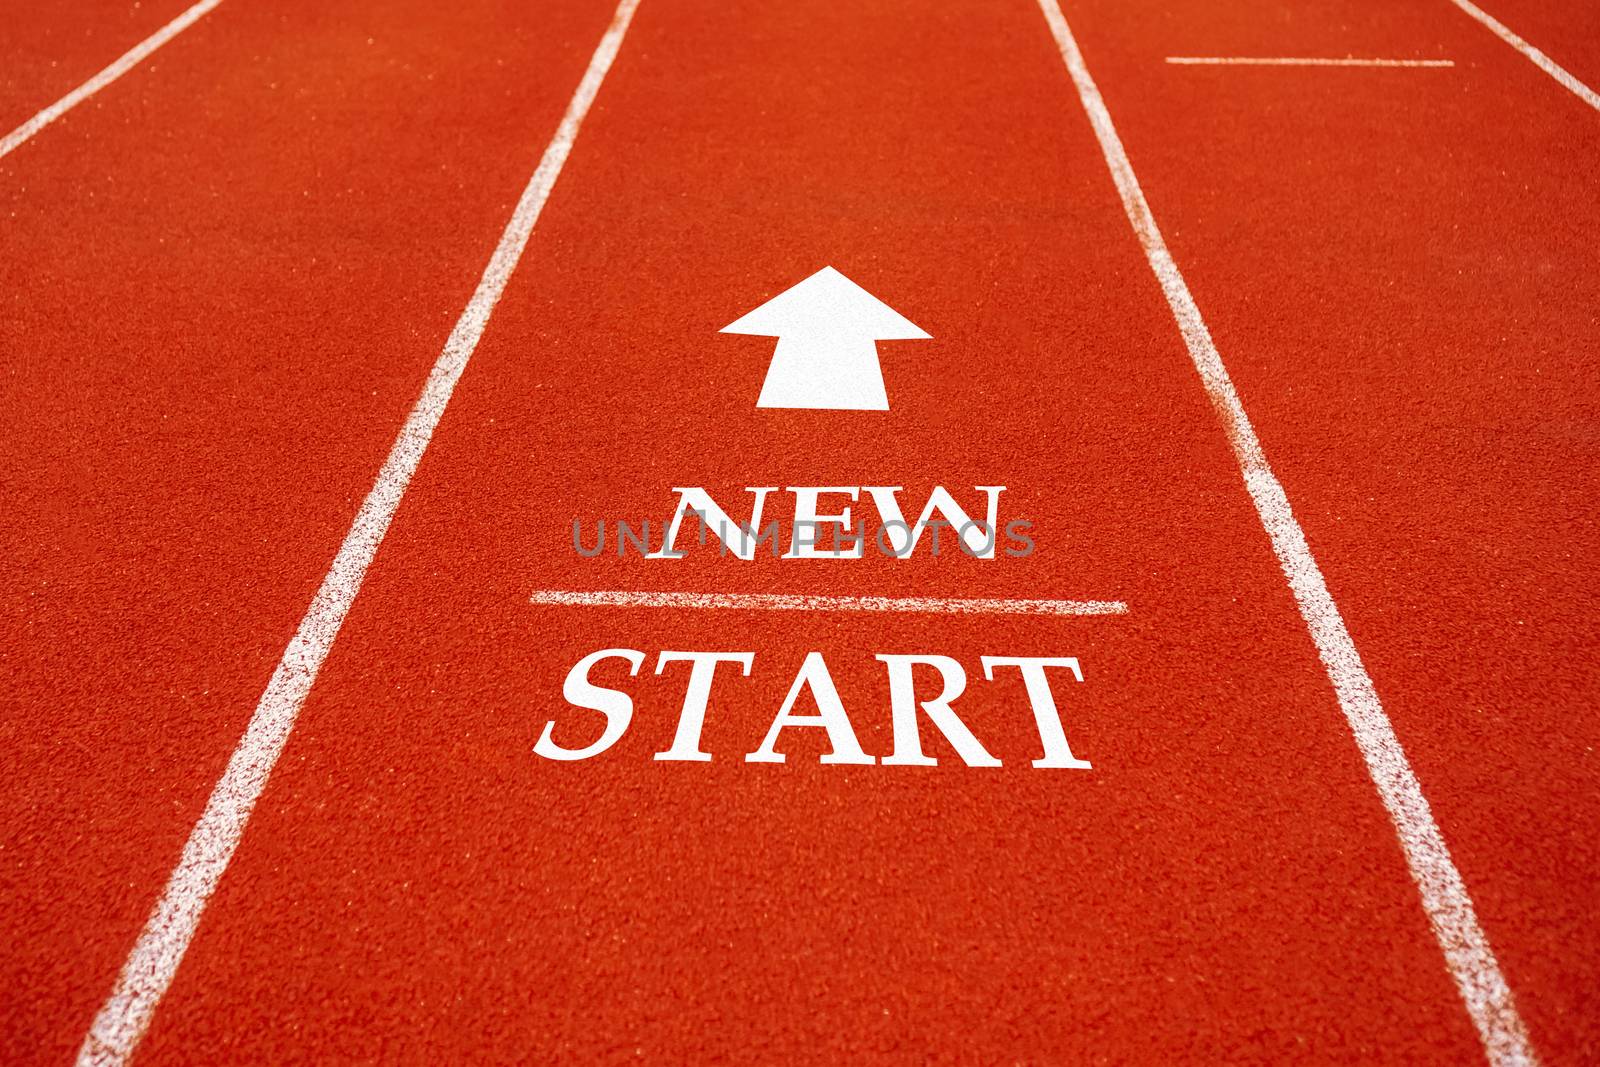 Start line on running court represents the beginning of a journey to the destination in business planning, strategy and challenge or career path, opportunity. by Suwant